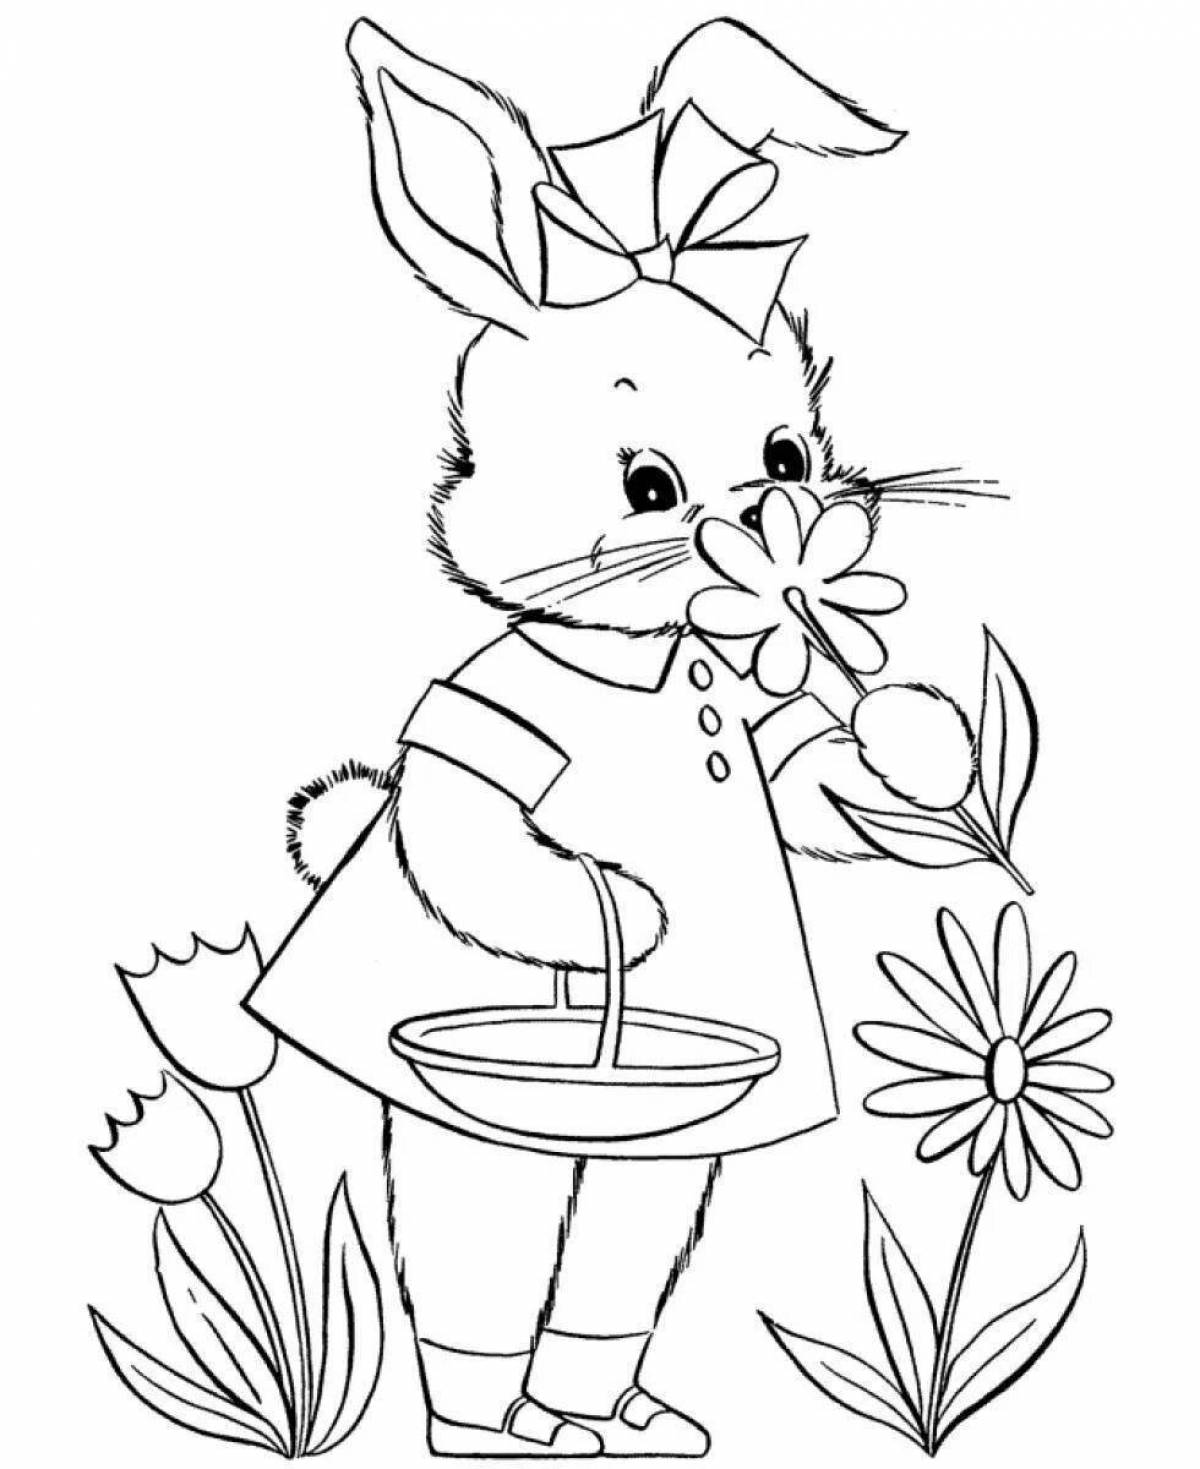 Joyful bunny coloring book with a bow